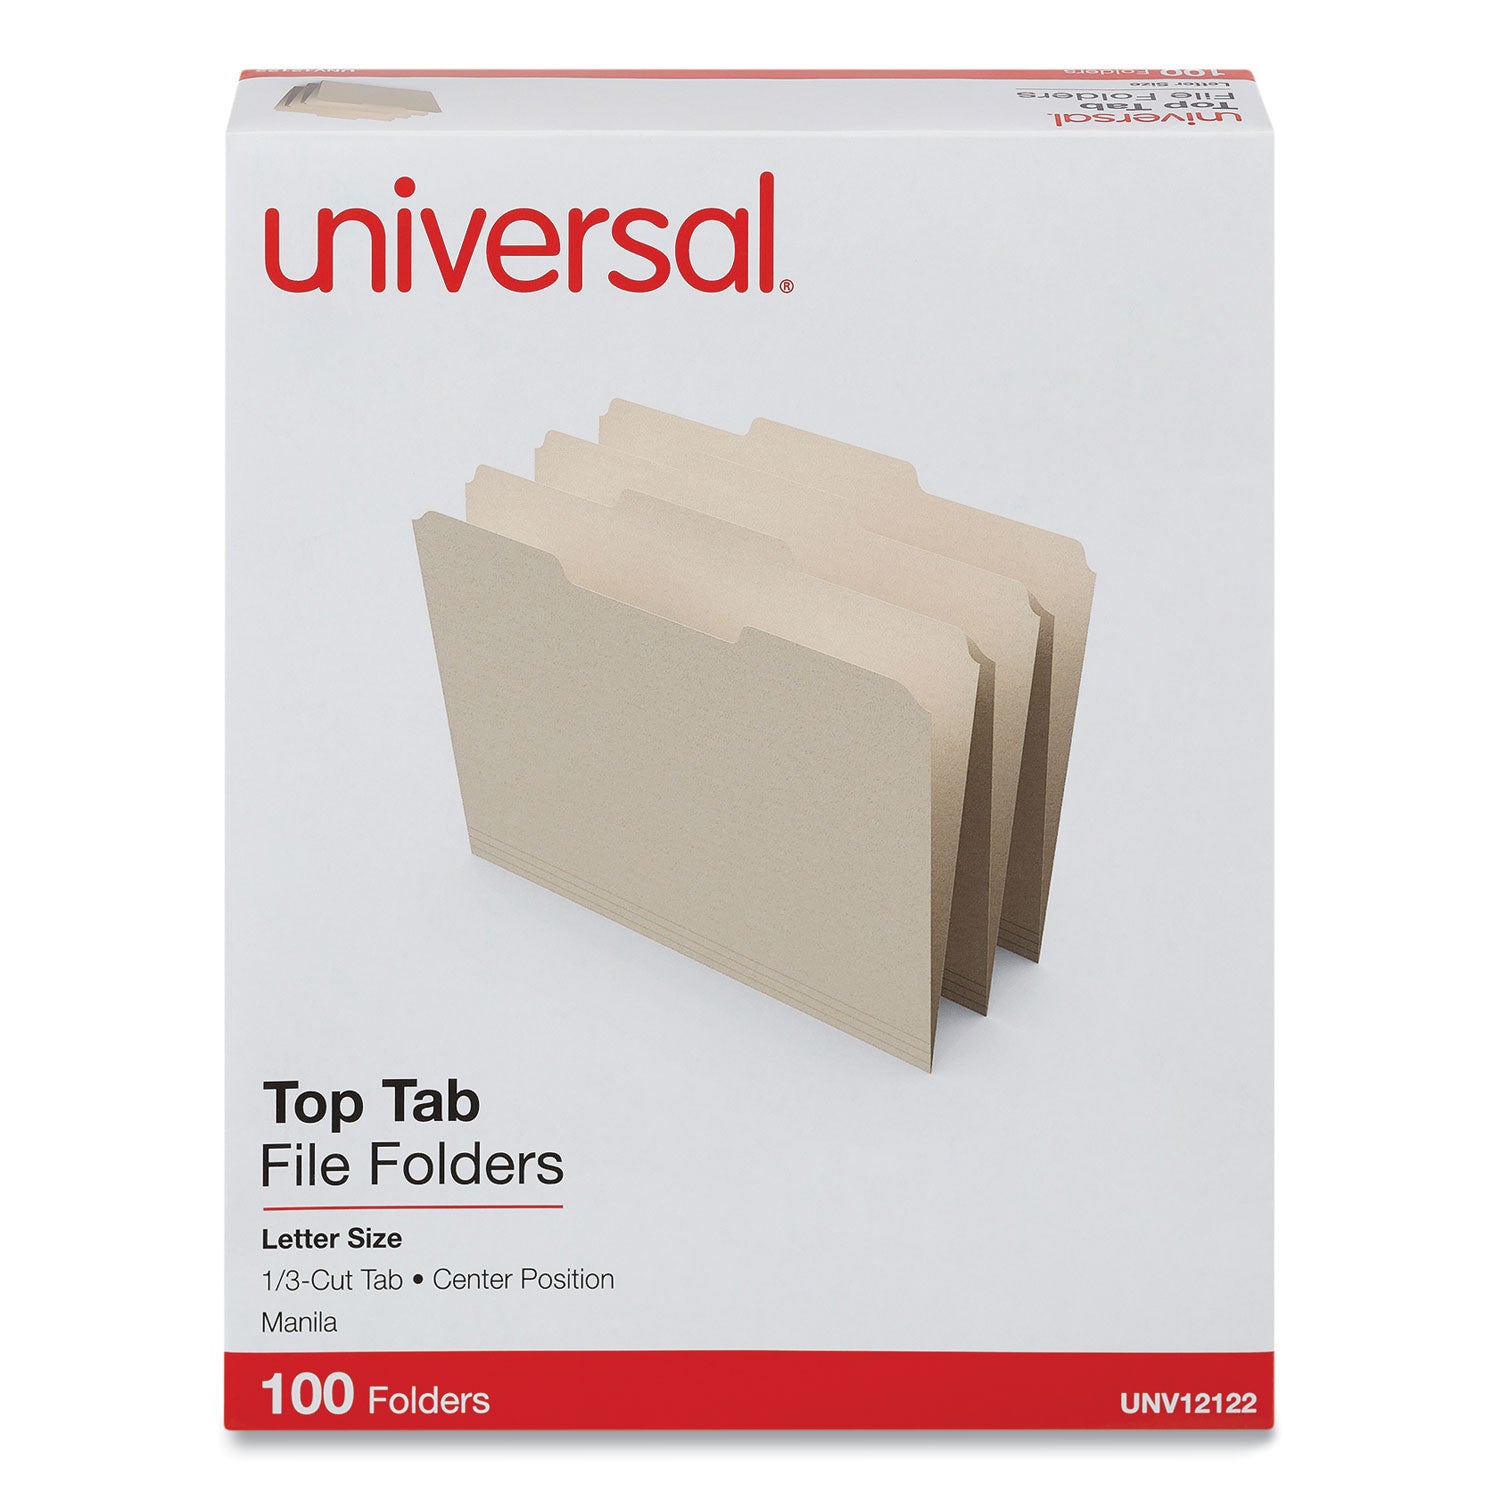 Top Tab File Folders, 1/3-Cut Tabs: Center Position, Letter Size, 0.75" Expansion, Manila, 100/Box - 